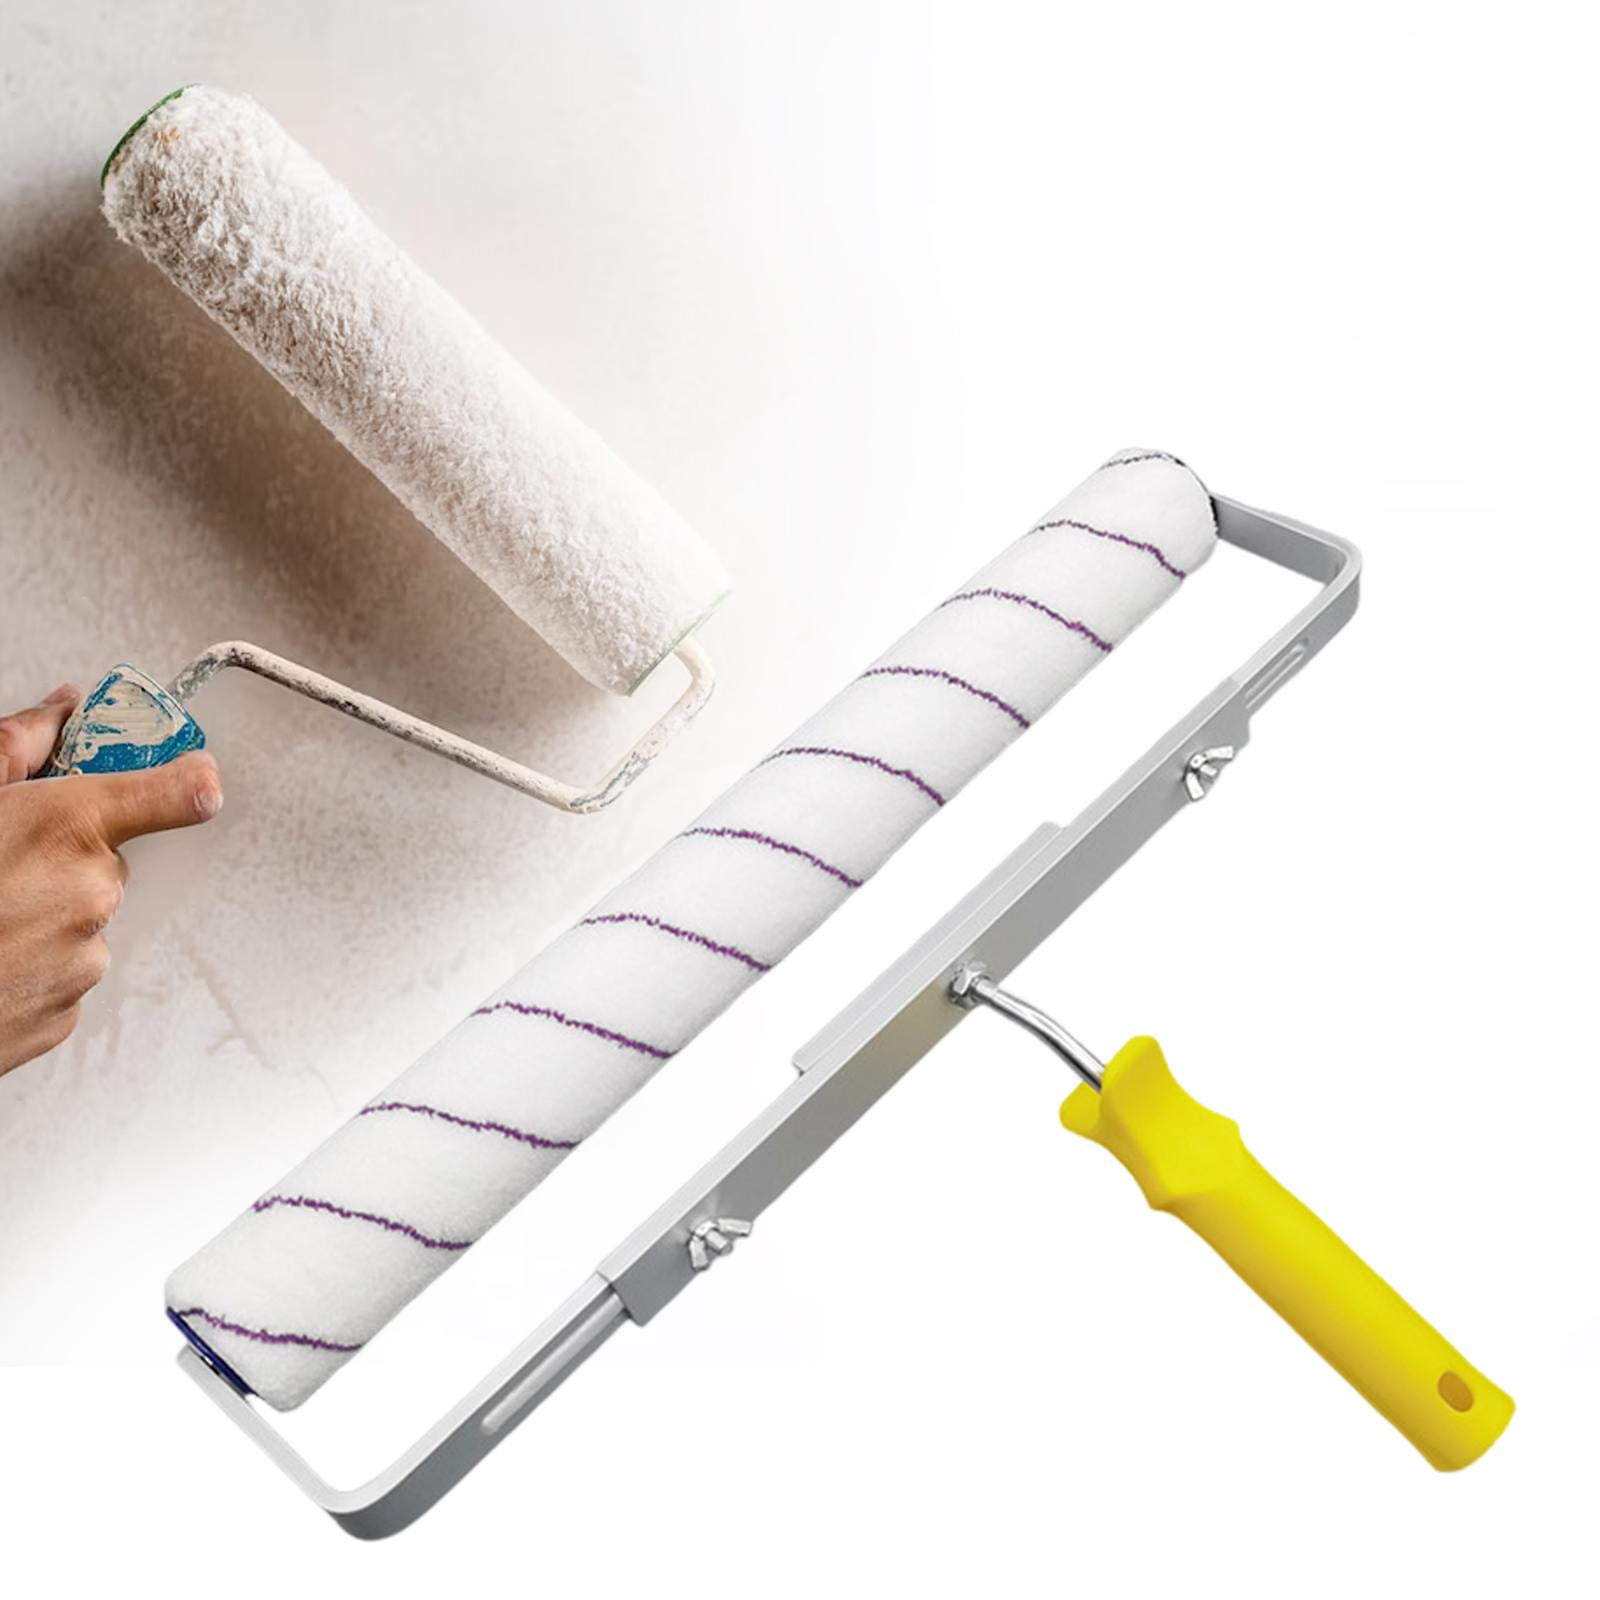 Paint roller cleaner - Paint Roller Cleaner